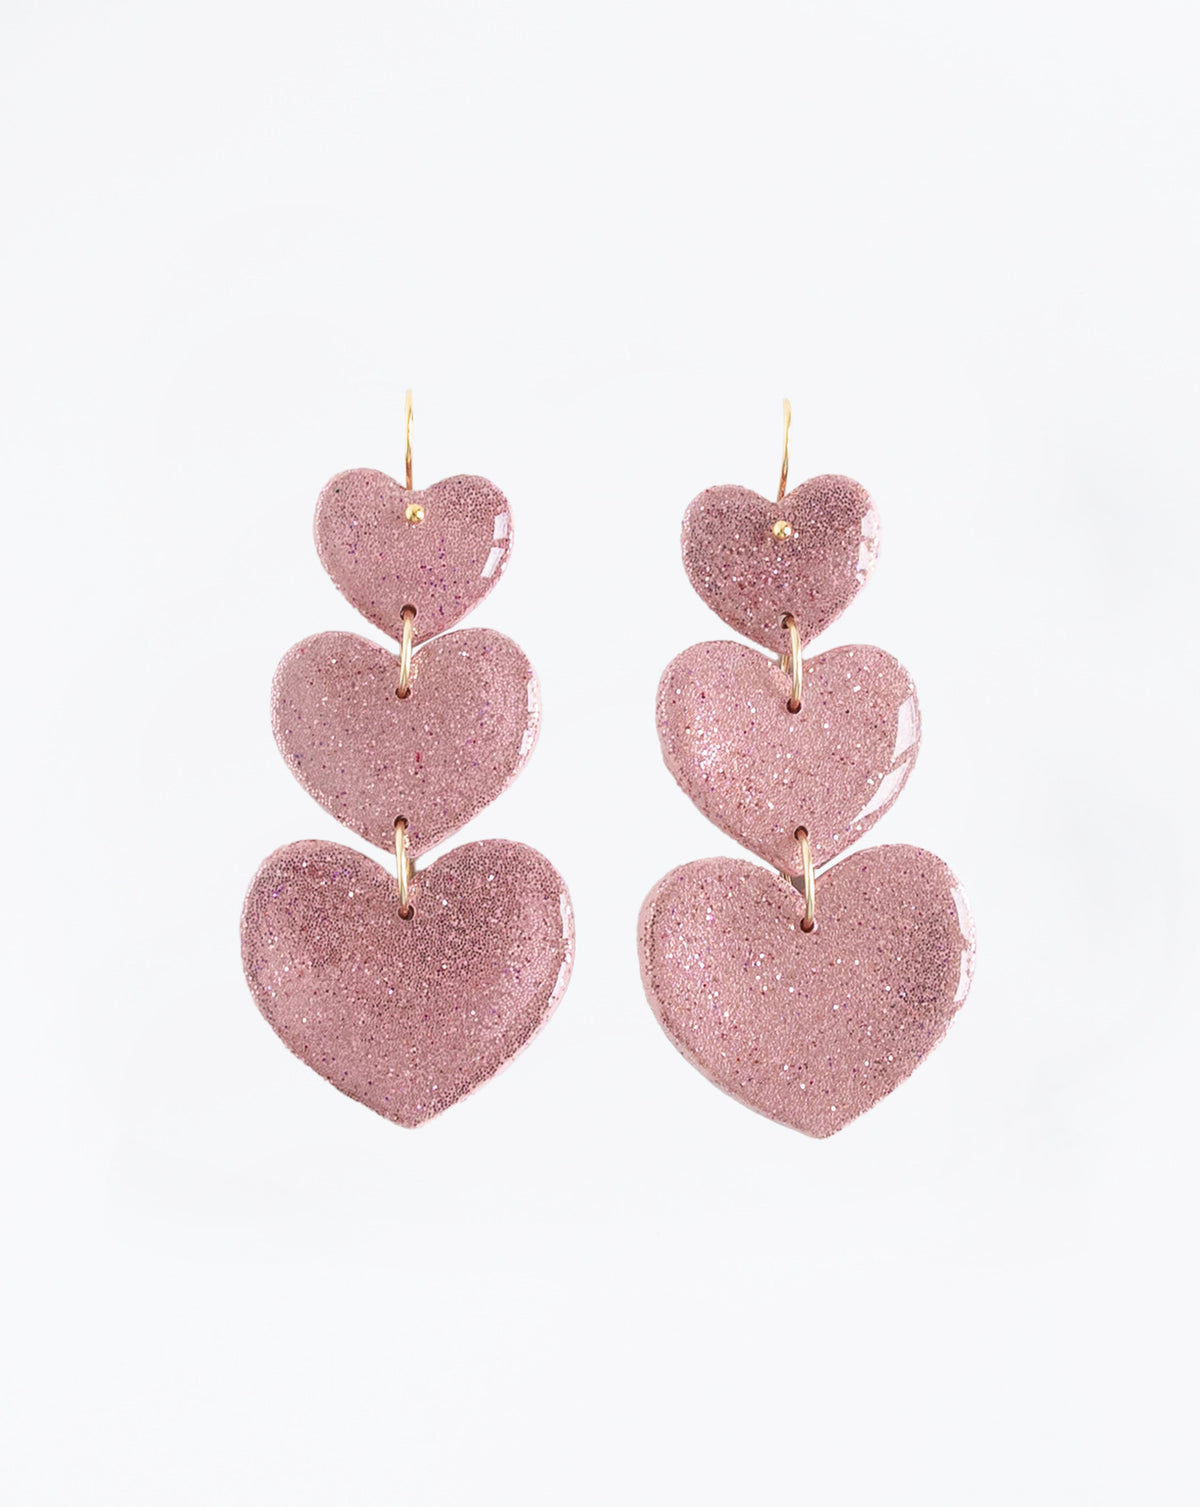 Leyli earrings in color pink, sparkle and shine of resin coated Polymer clay.handmade in LYHO studio in the Netherlands. 